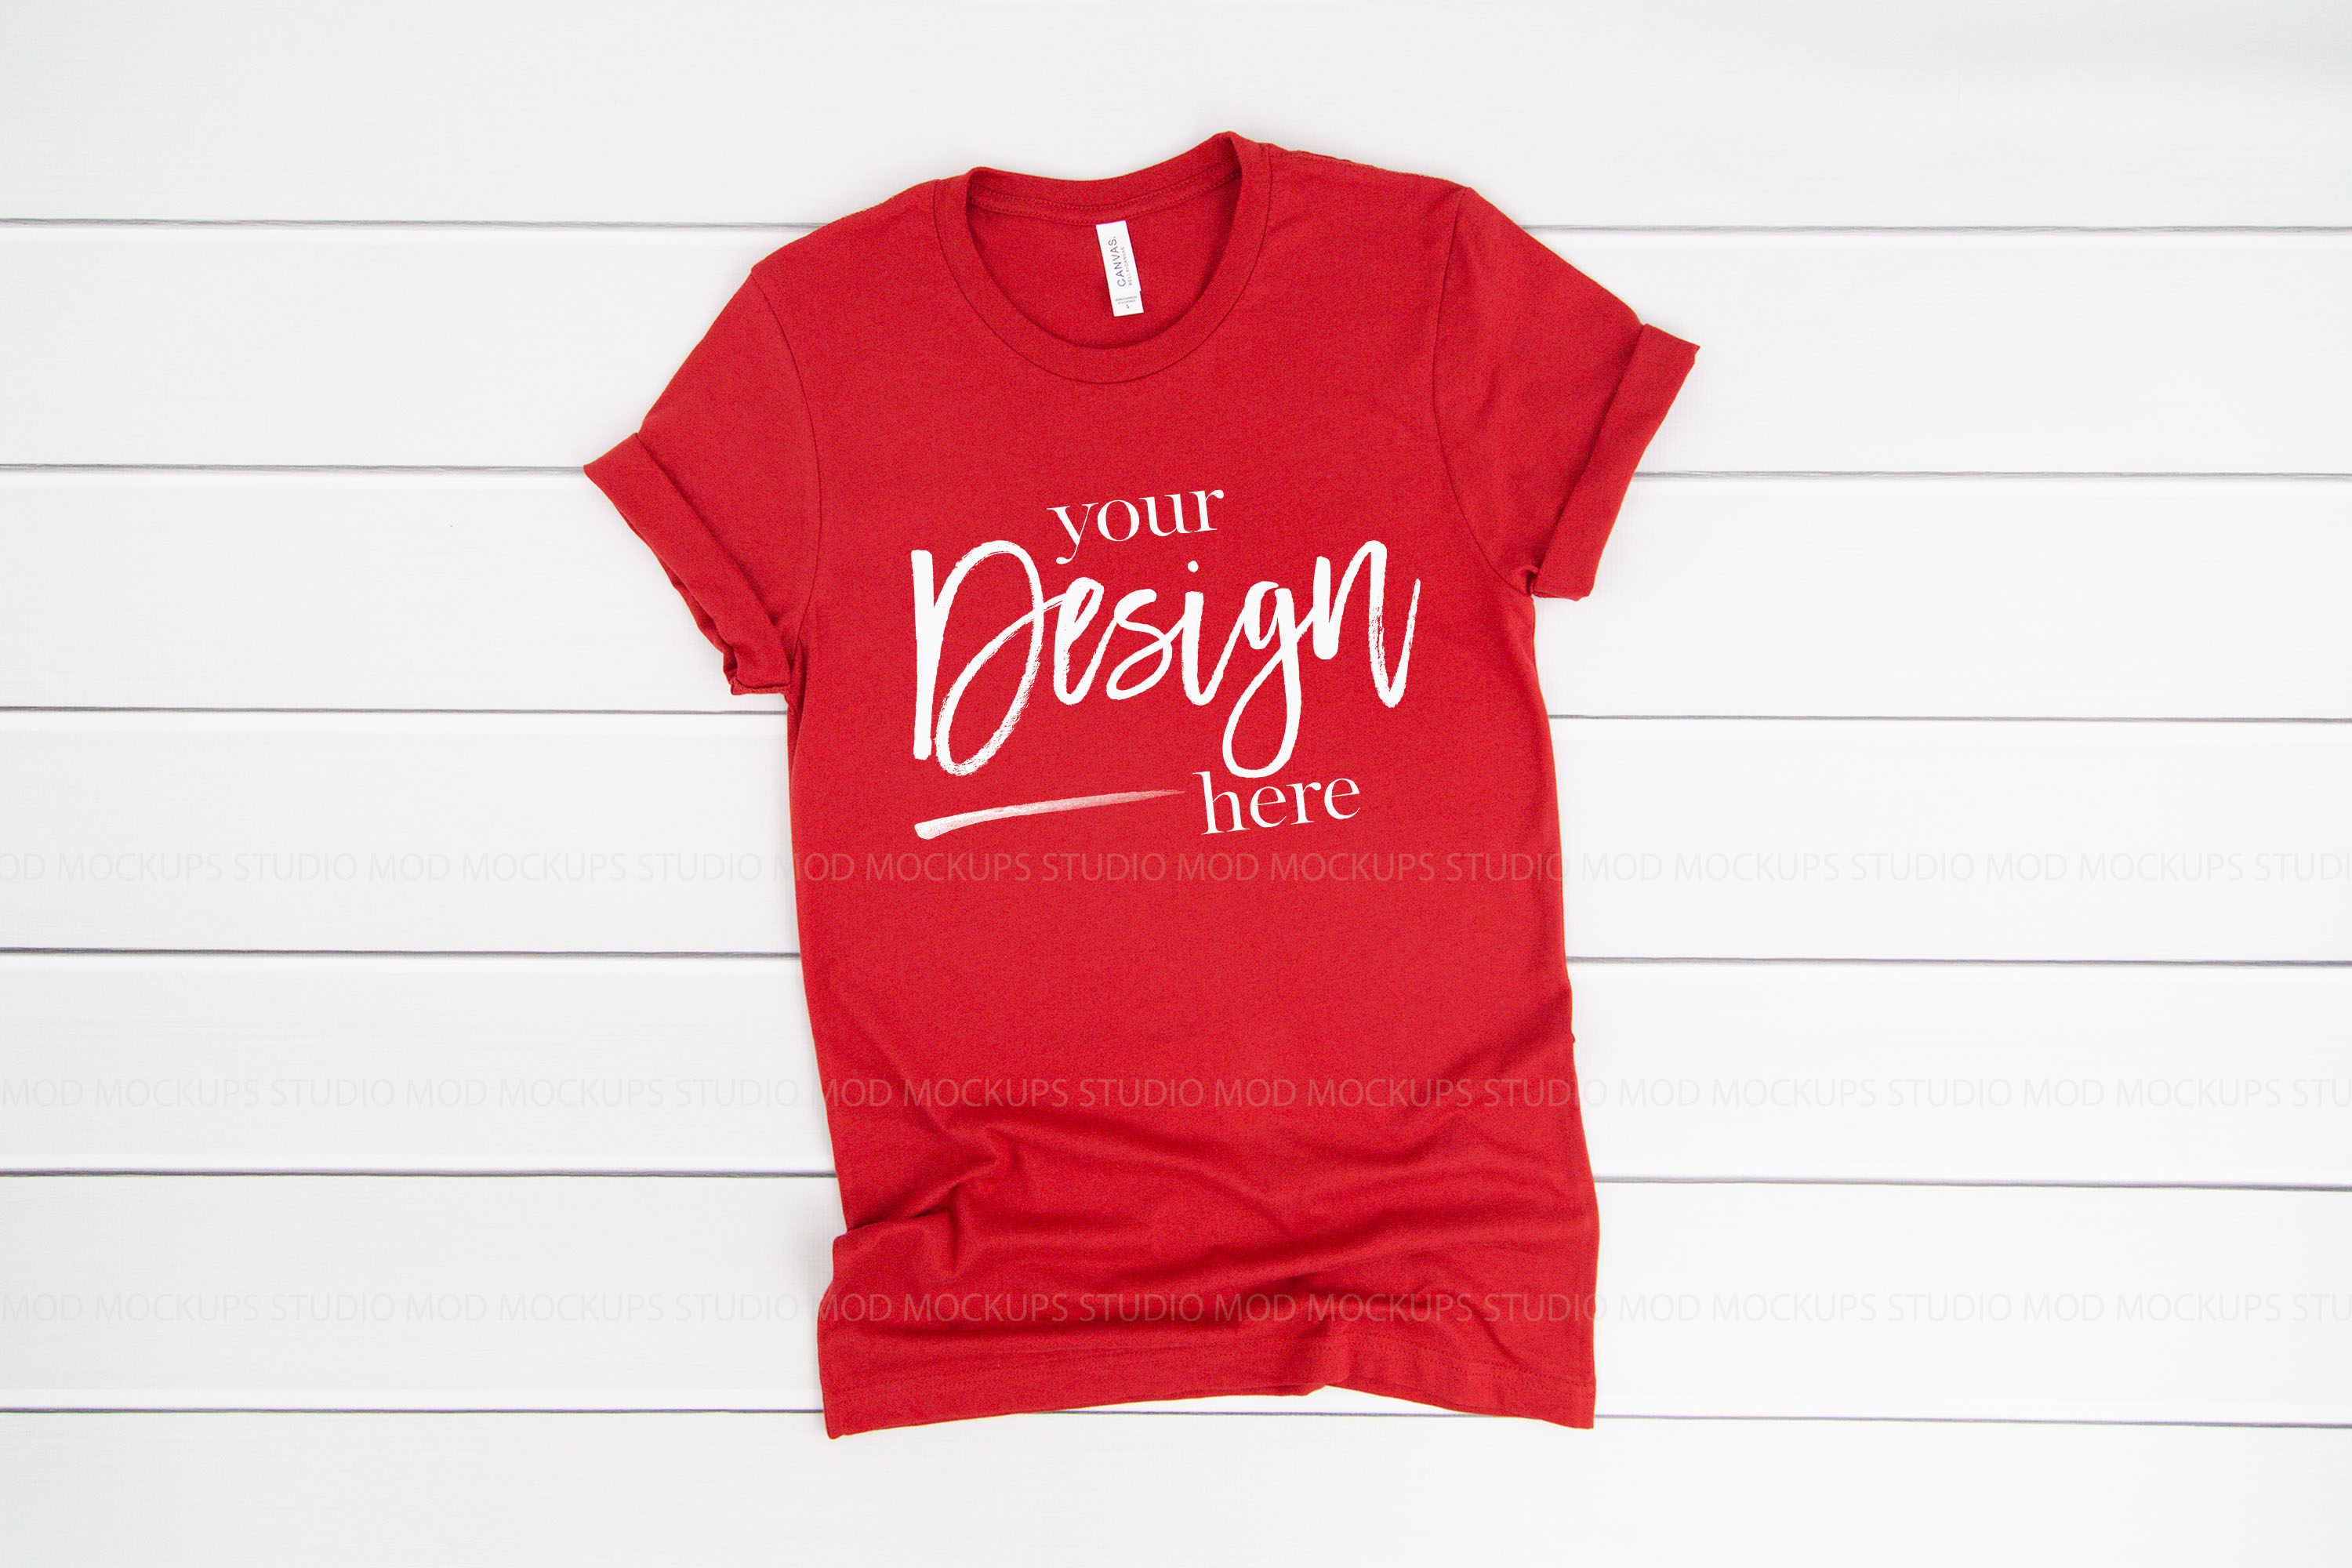 Download 5758+ Design Red T Shirt Mockup for Branding - Free Mockups. Magazines & Books, iPhone, iPad ...